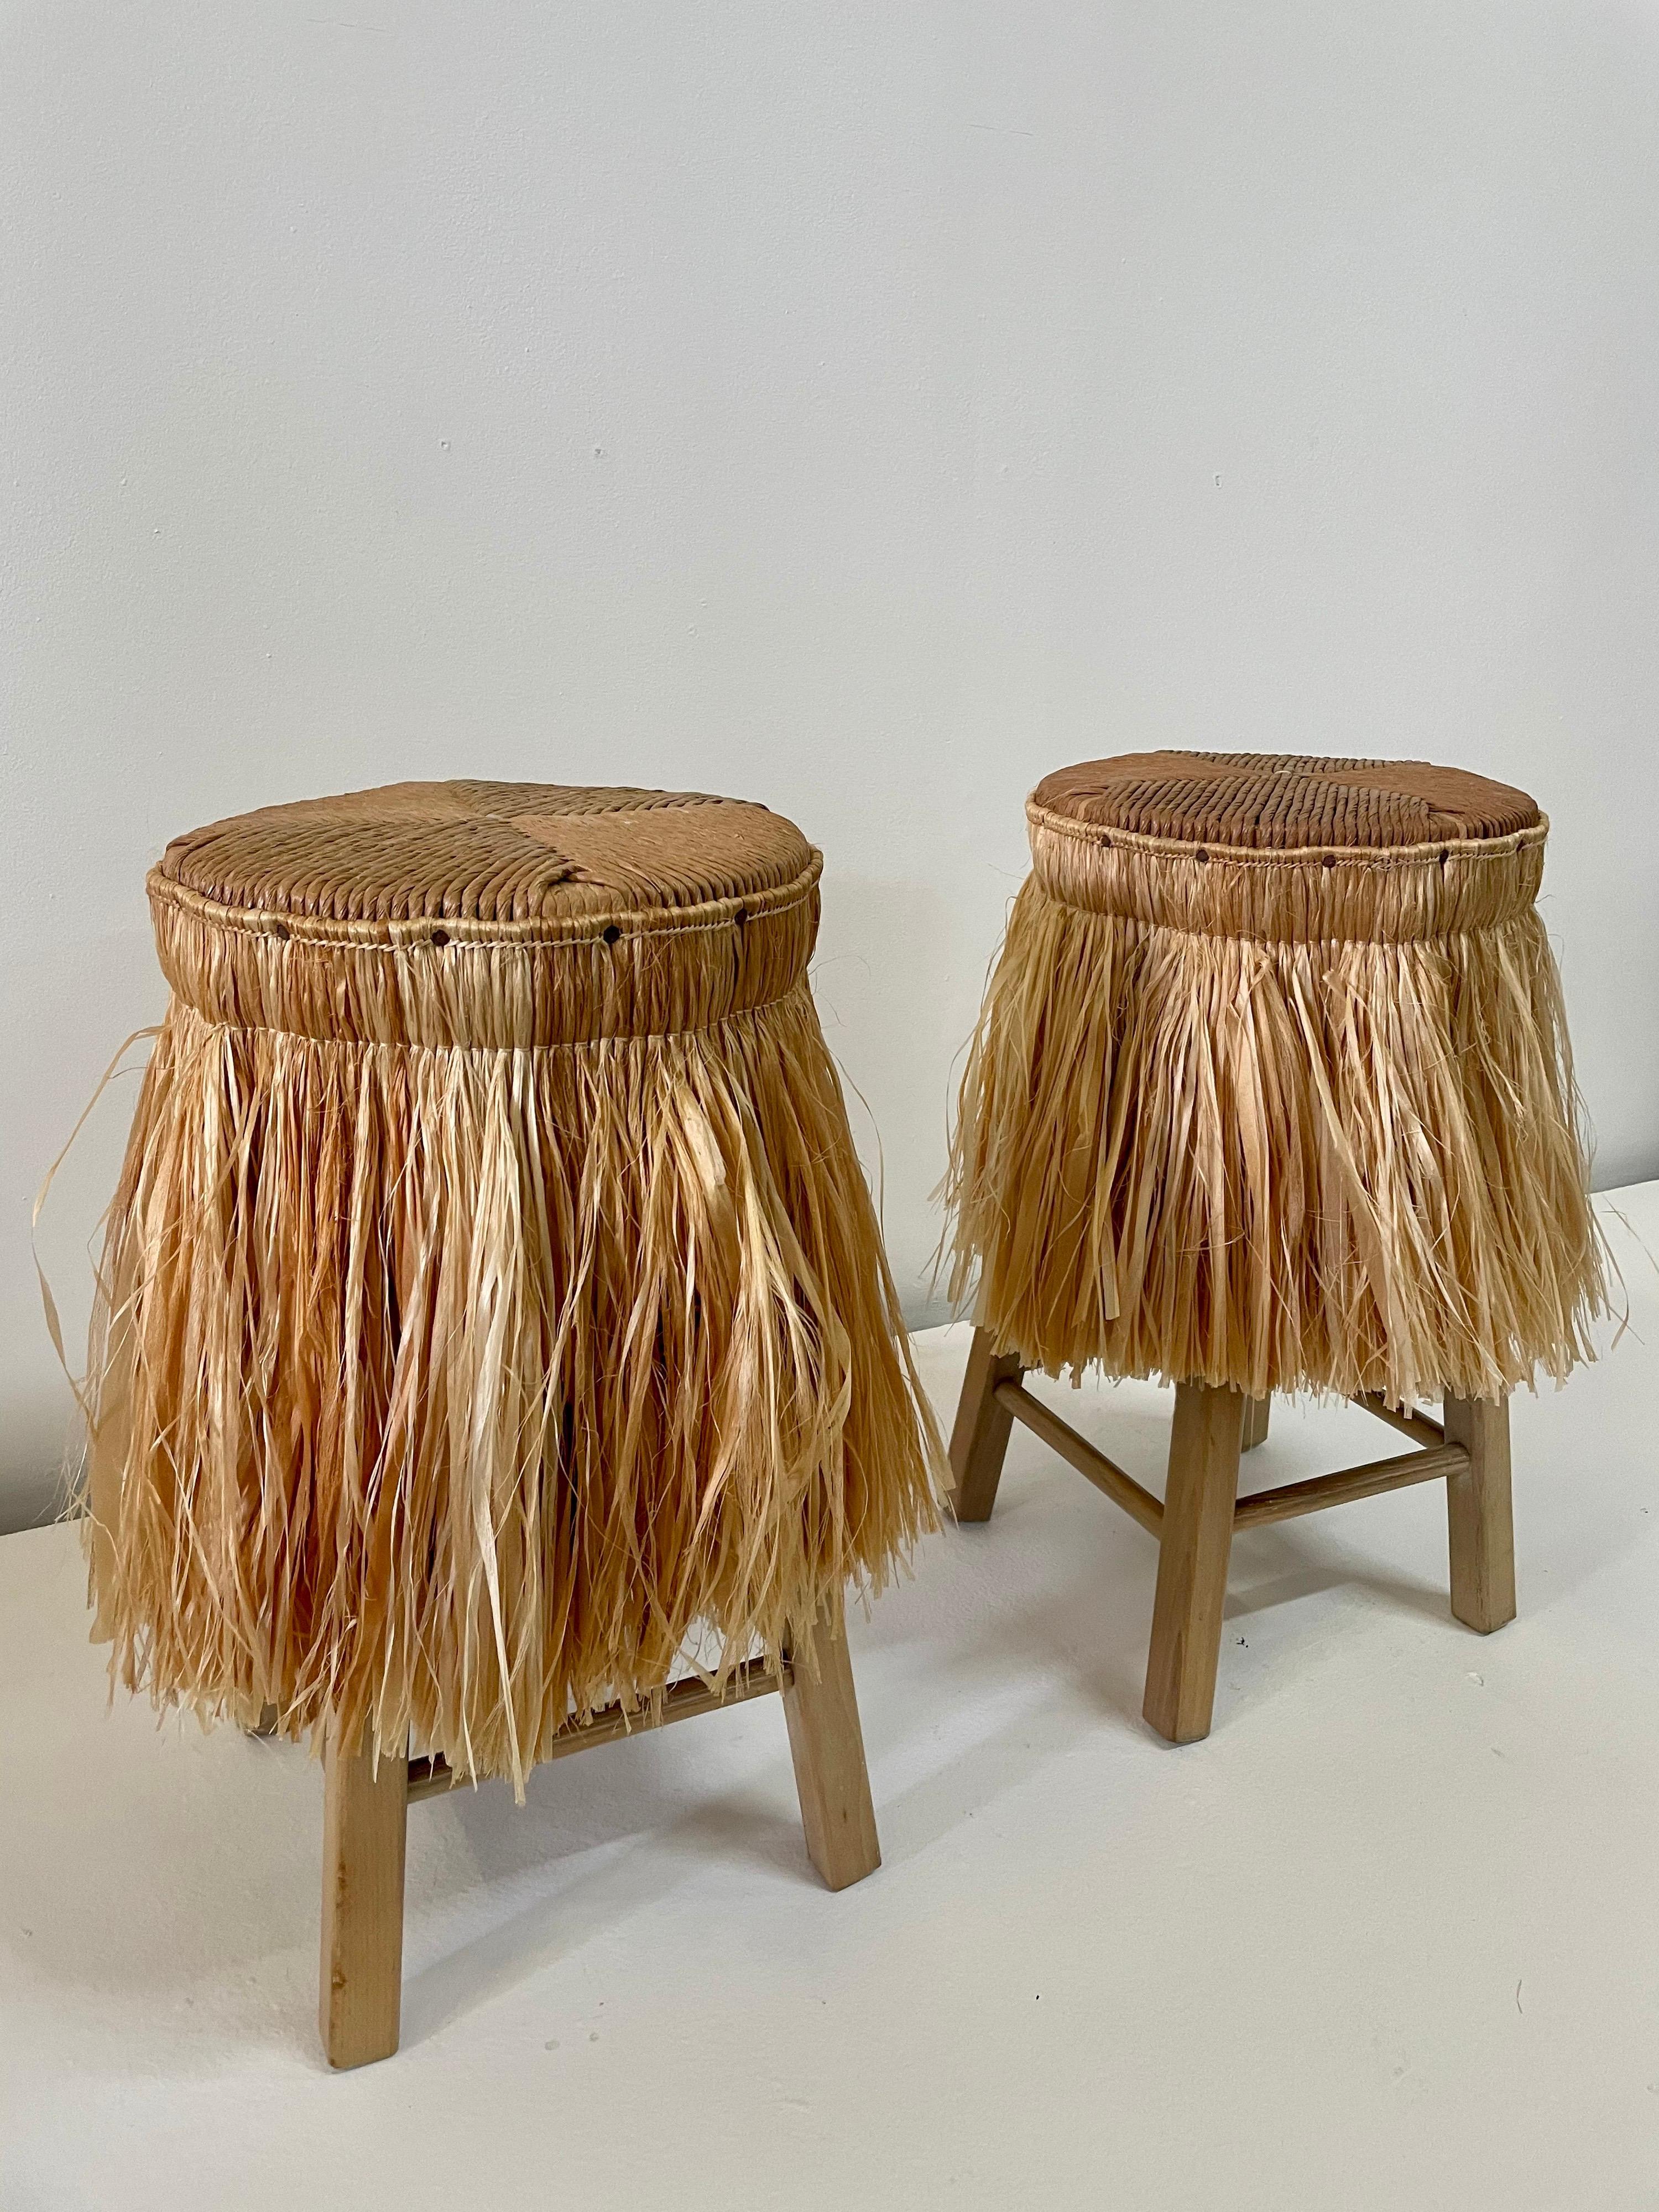 Chic stools with Raffia Skirt and Jute Seat in the style of French designer Christian Astuguevieille.

 